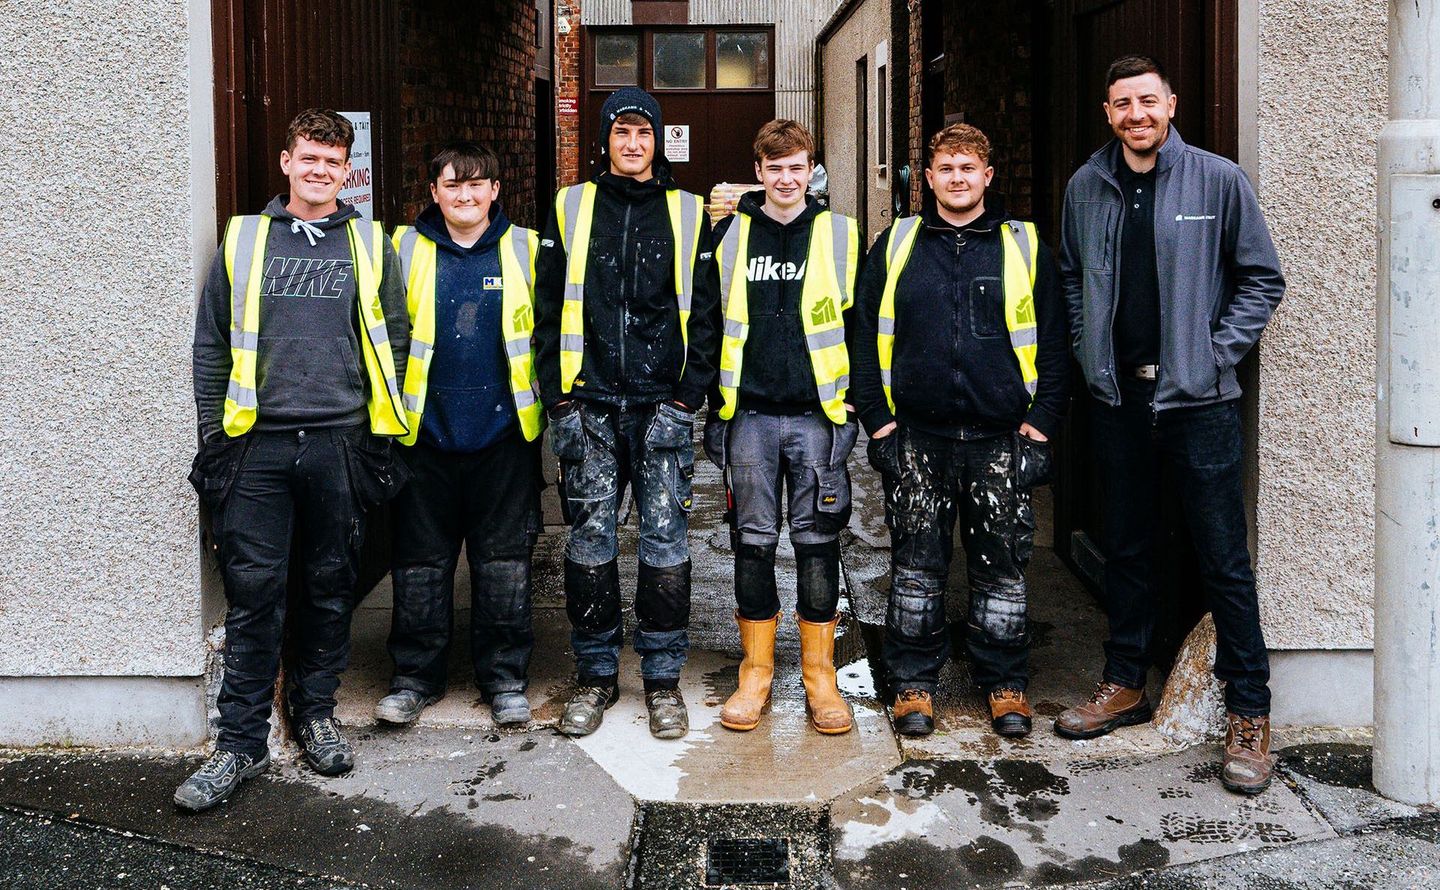 Team of joiners in work clothes and high vis